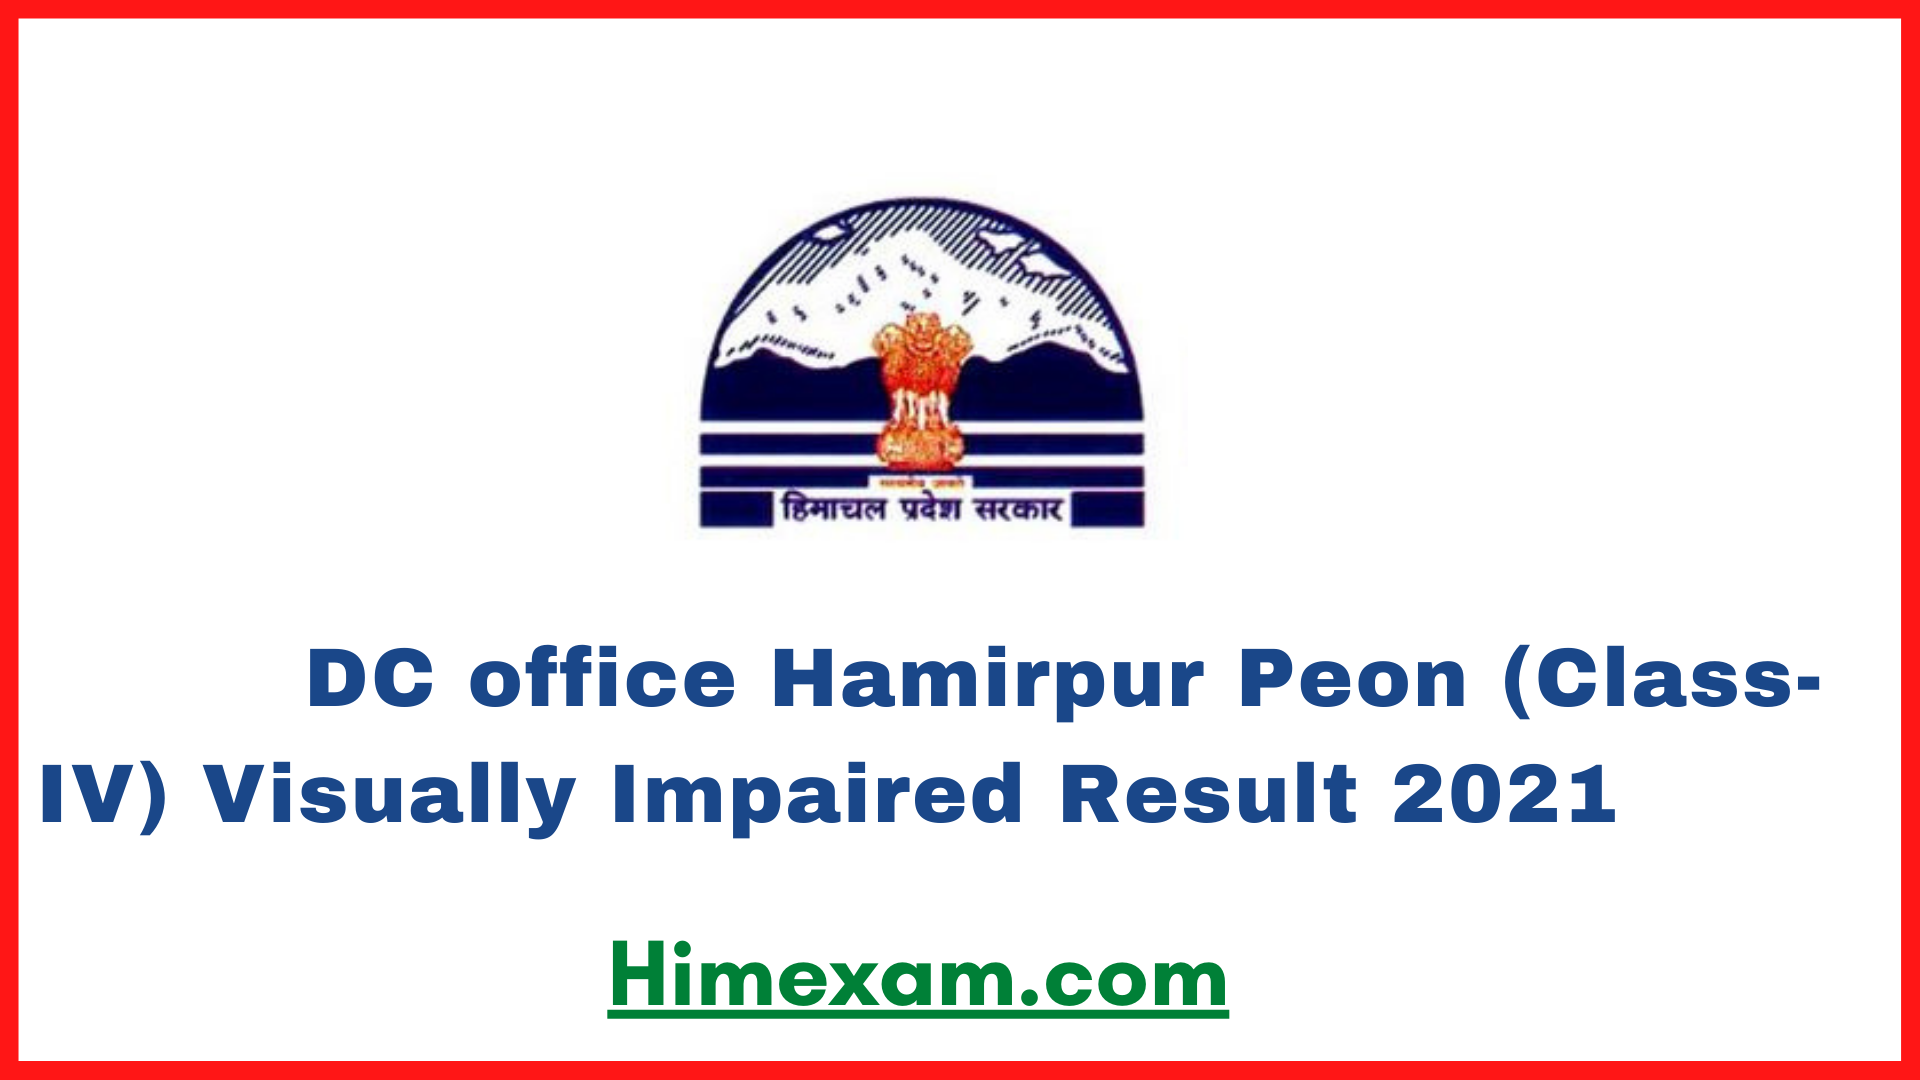 DC office Hamirpur Peon (Class-IV) Visually Impaired Result 2021